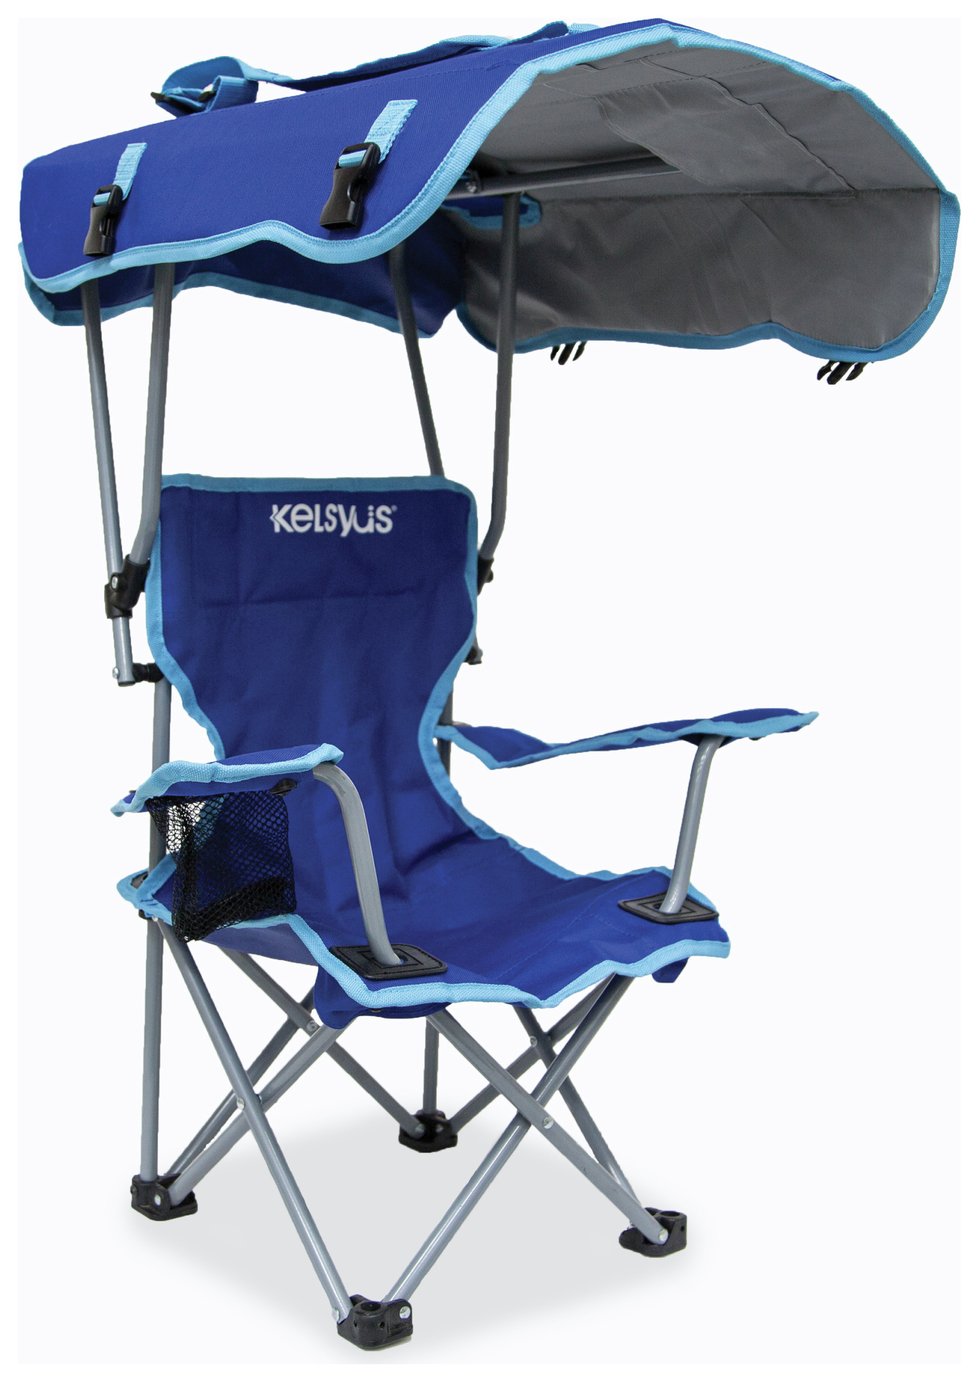 Kelsyus Kid's Camping Canopy Chair